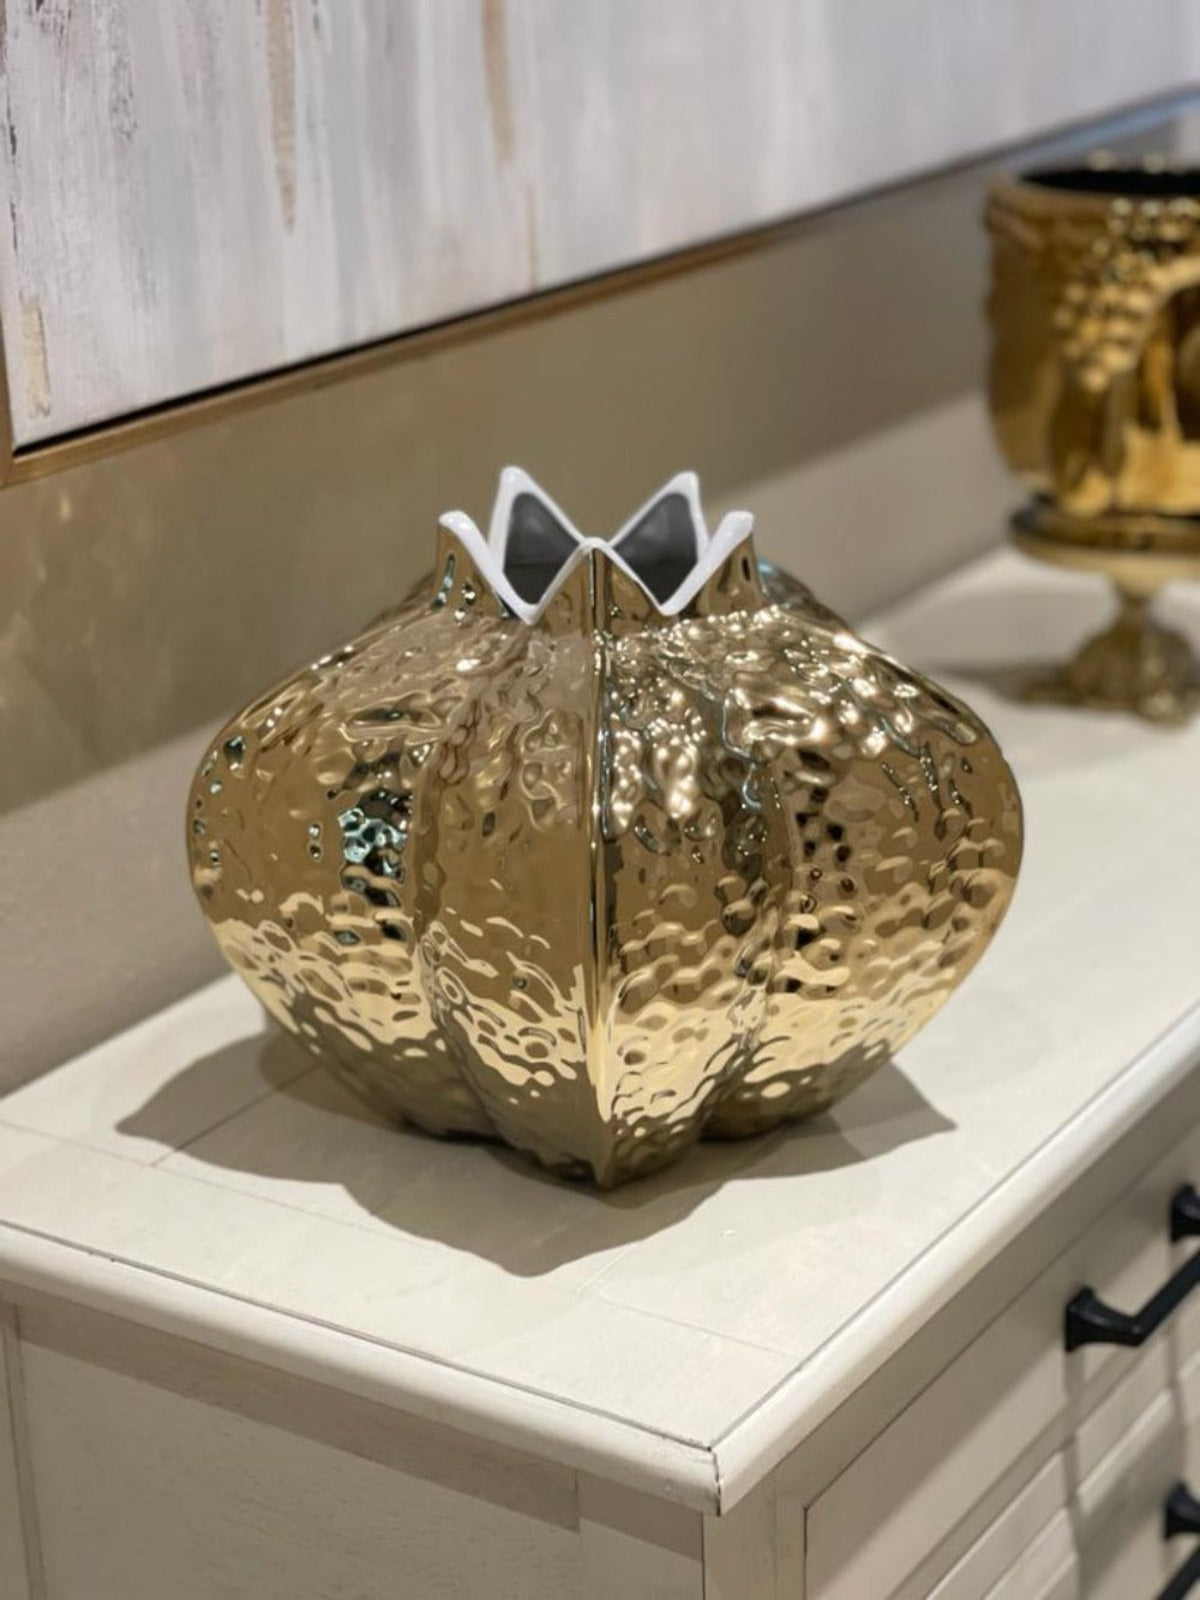 This Stunning Gold Pomegranate Vase with White Rim are elegantly crafted to beautify your home decor. These unique gold vases have a fun shape and look so beautiful with your favorite faux florals!